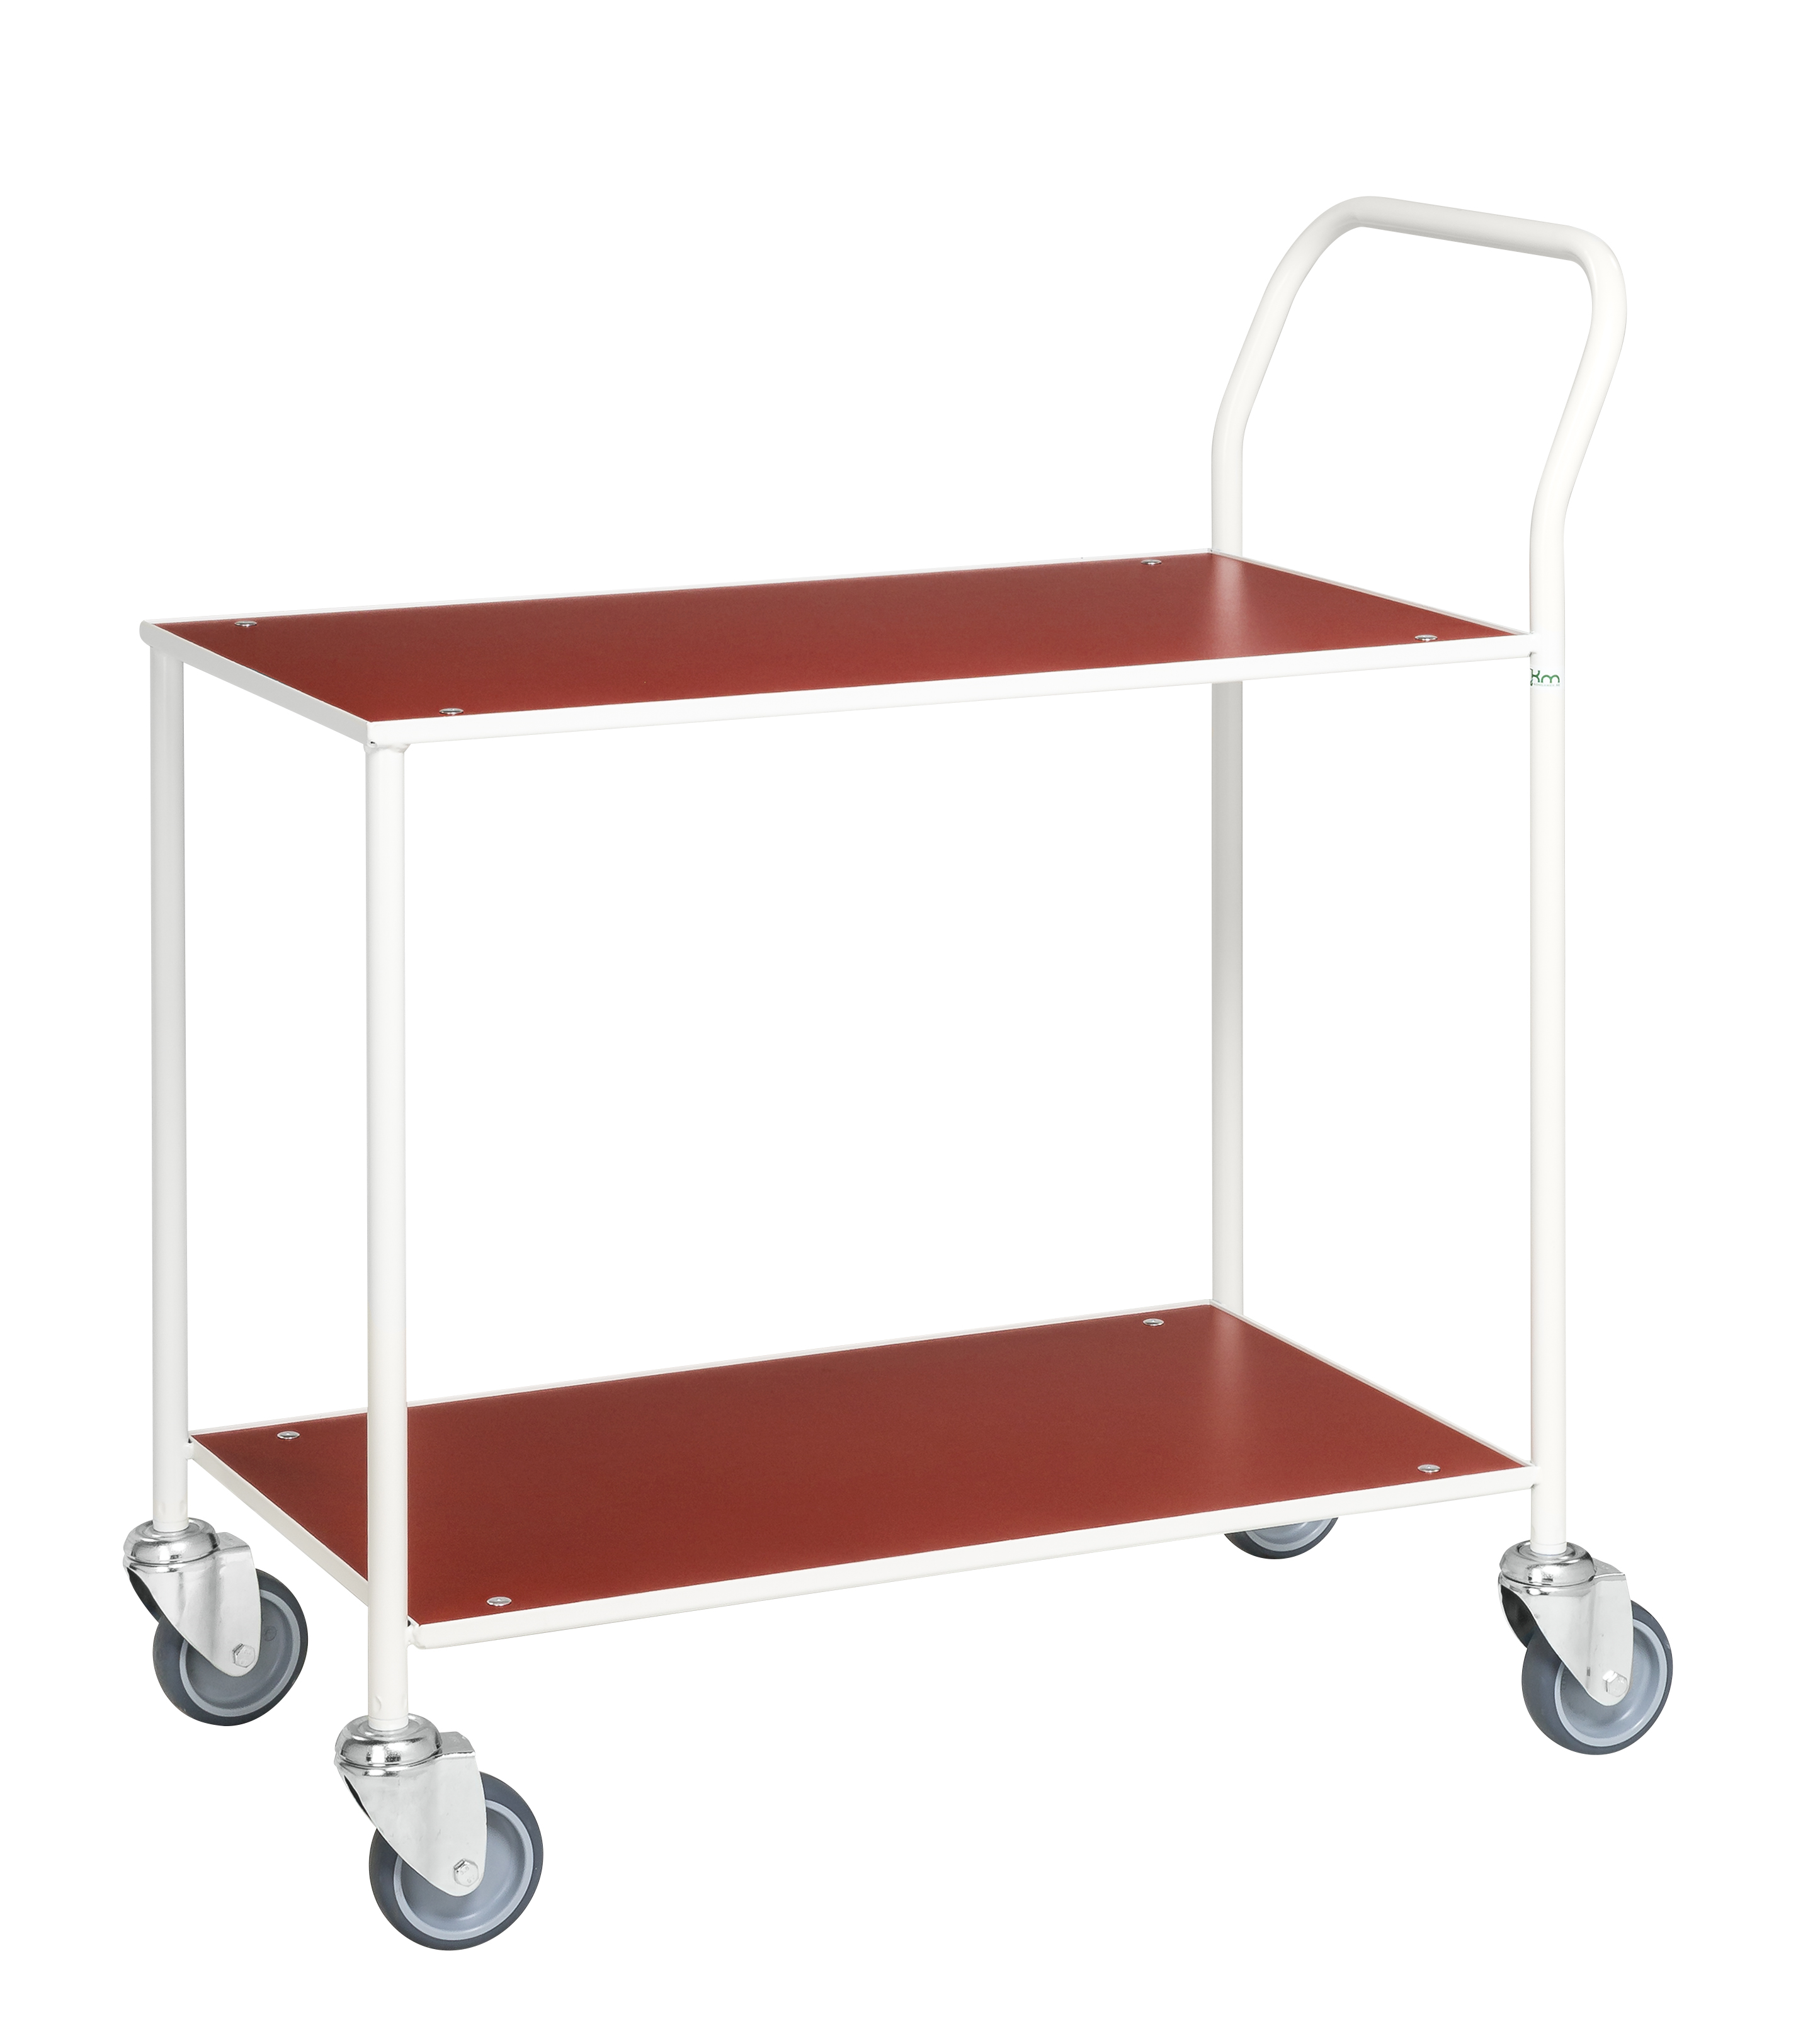 Small table trolley, fully welded KM173-1